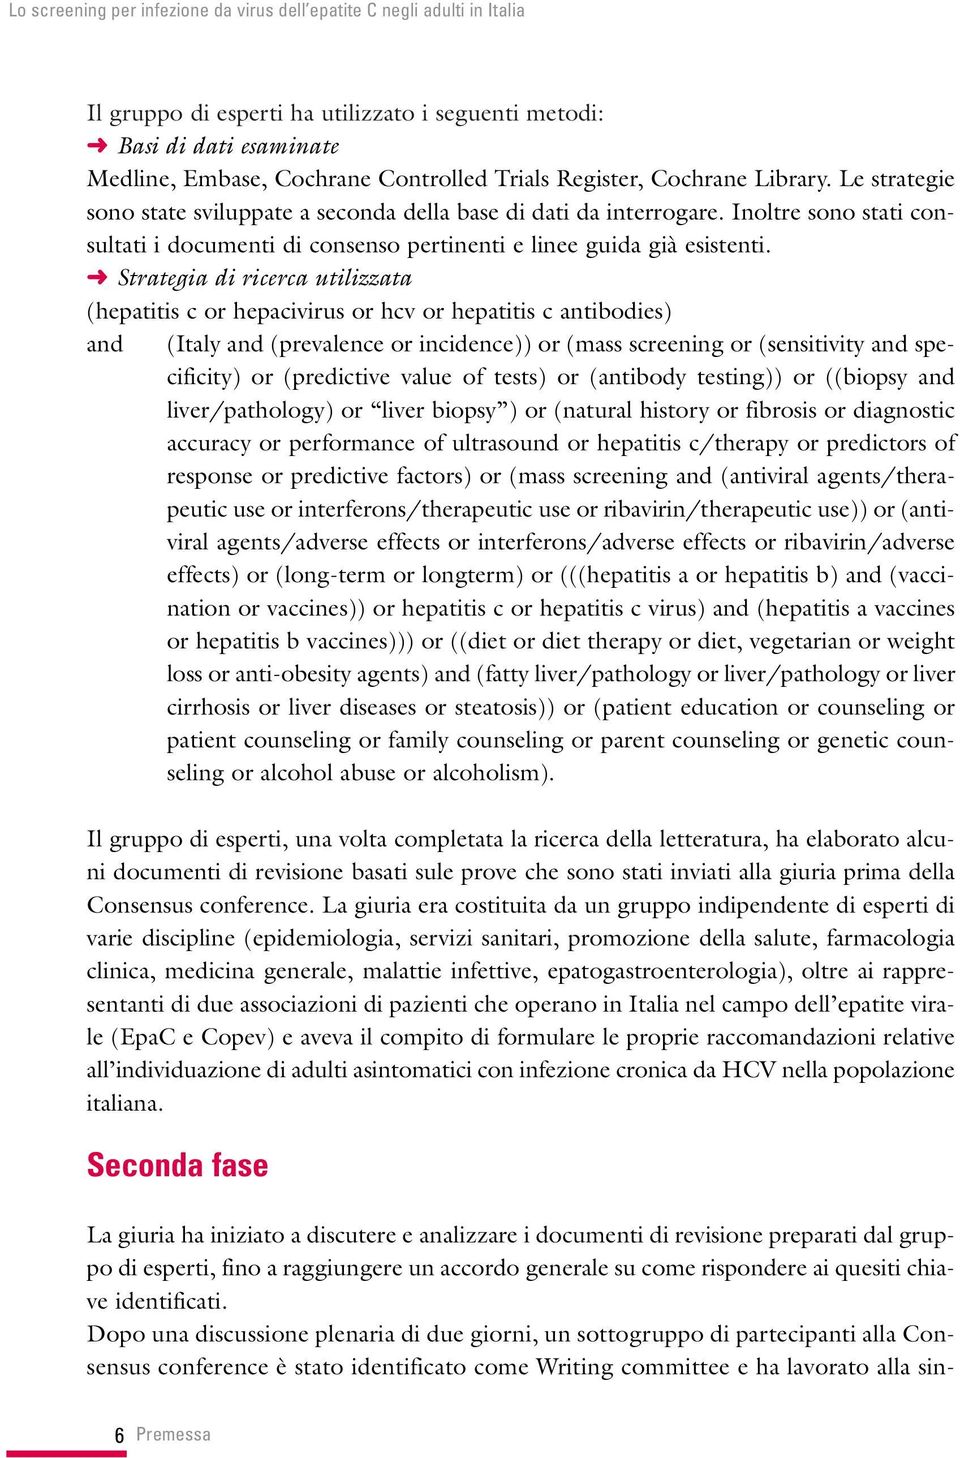 Strategia di ricerca utilizzata (hepatitis c or hepacivirus or hcv or hepatitis c antibodies) and (Italy and (prevalence or incidence)) or (mass screening or (sensitivity and specificity) or